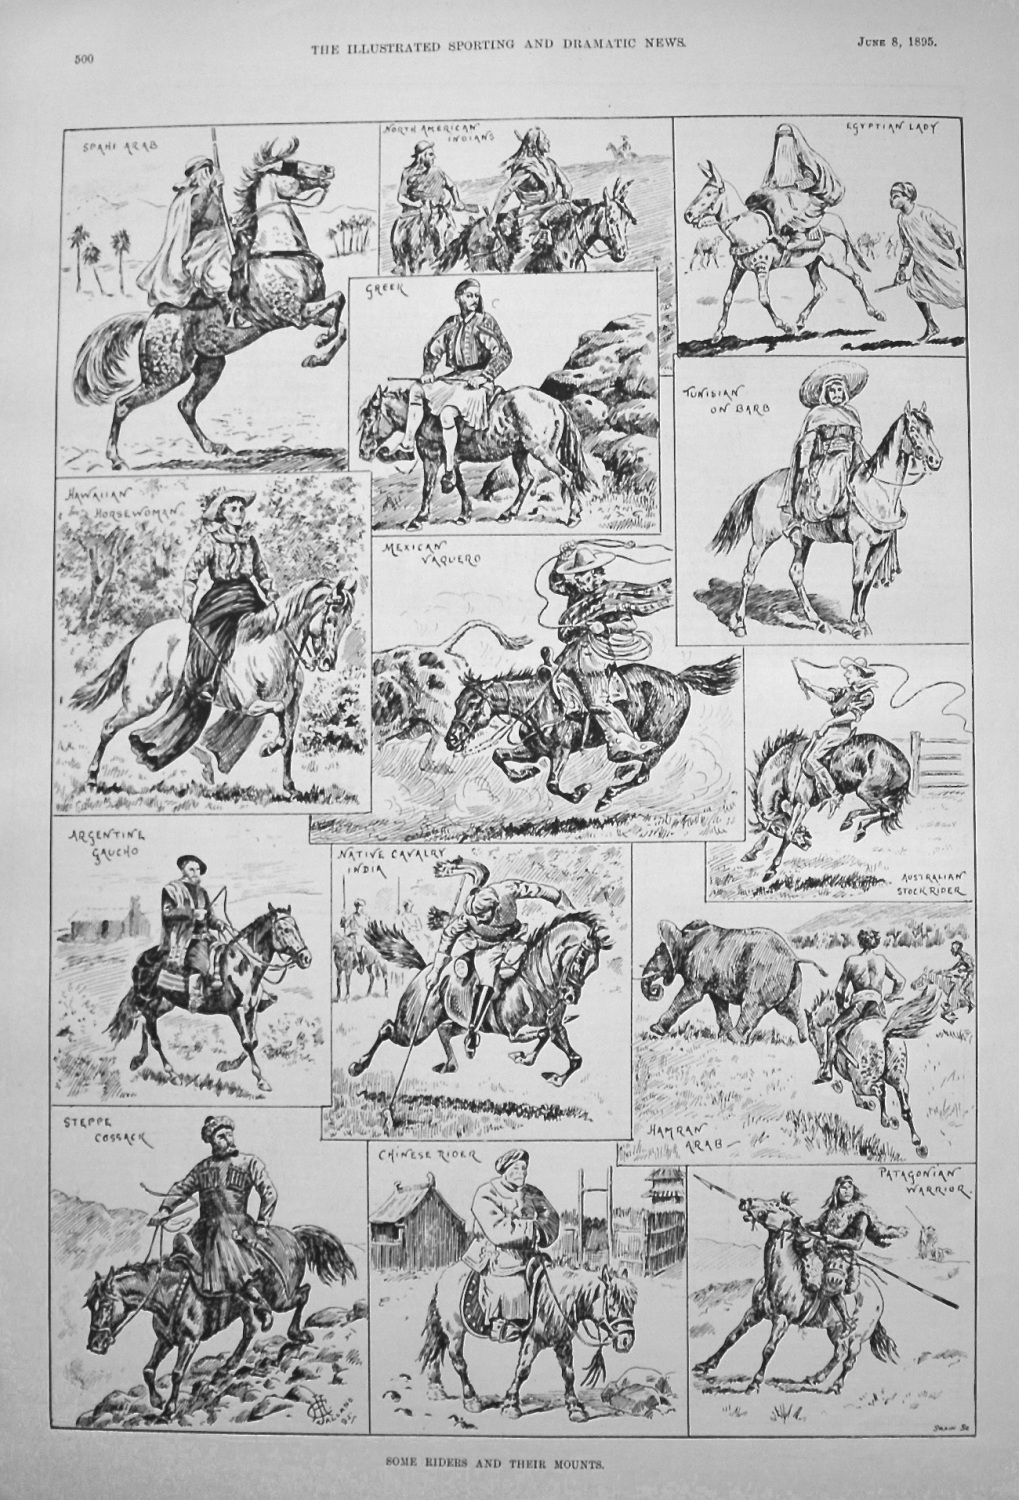 Some Riders and Their Mounts. 1895